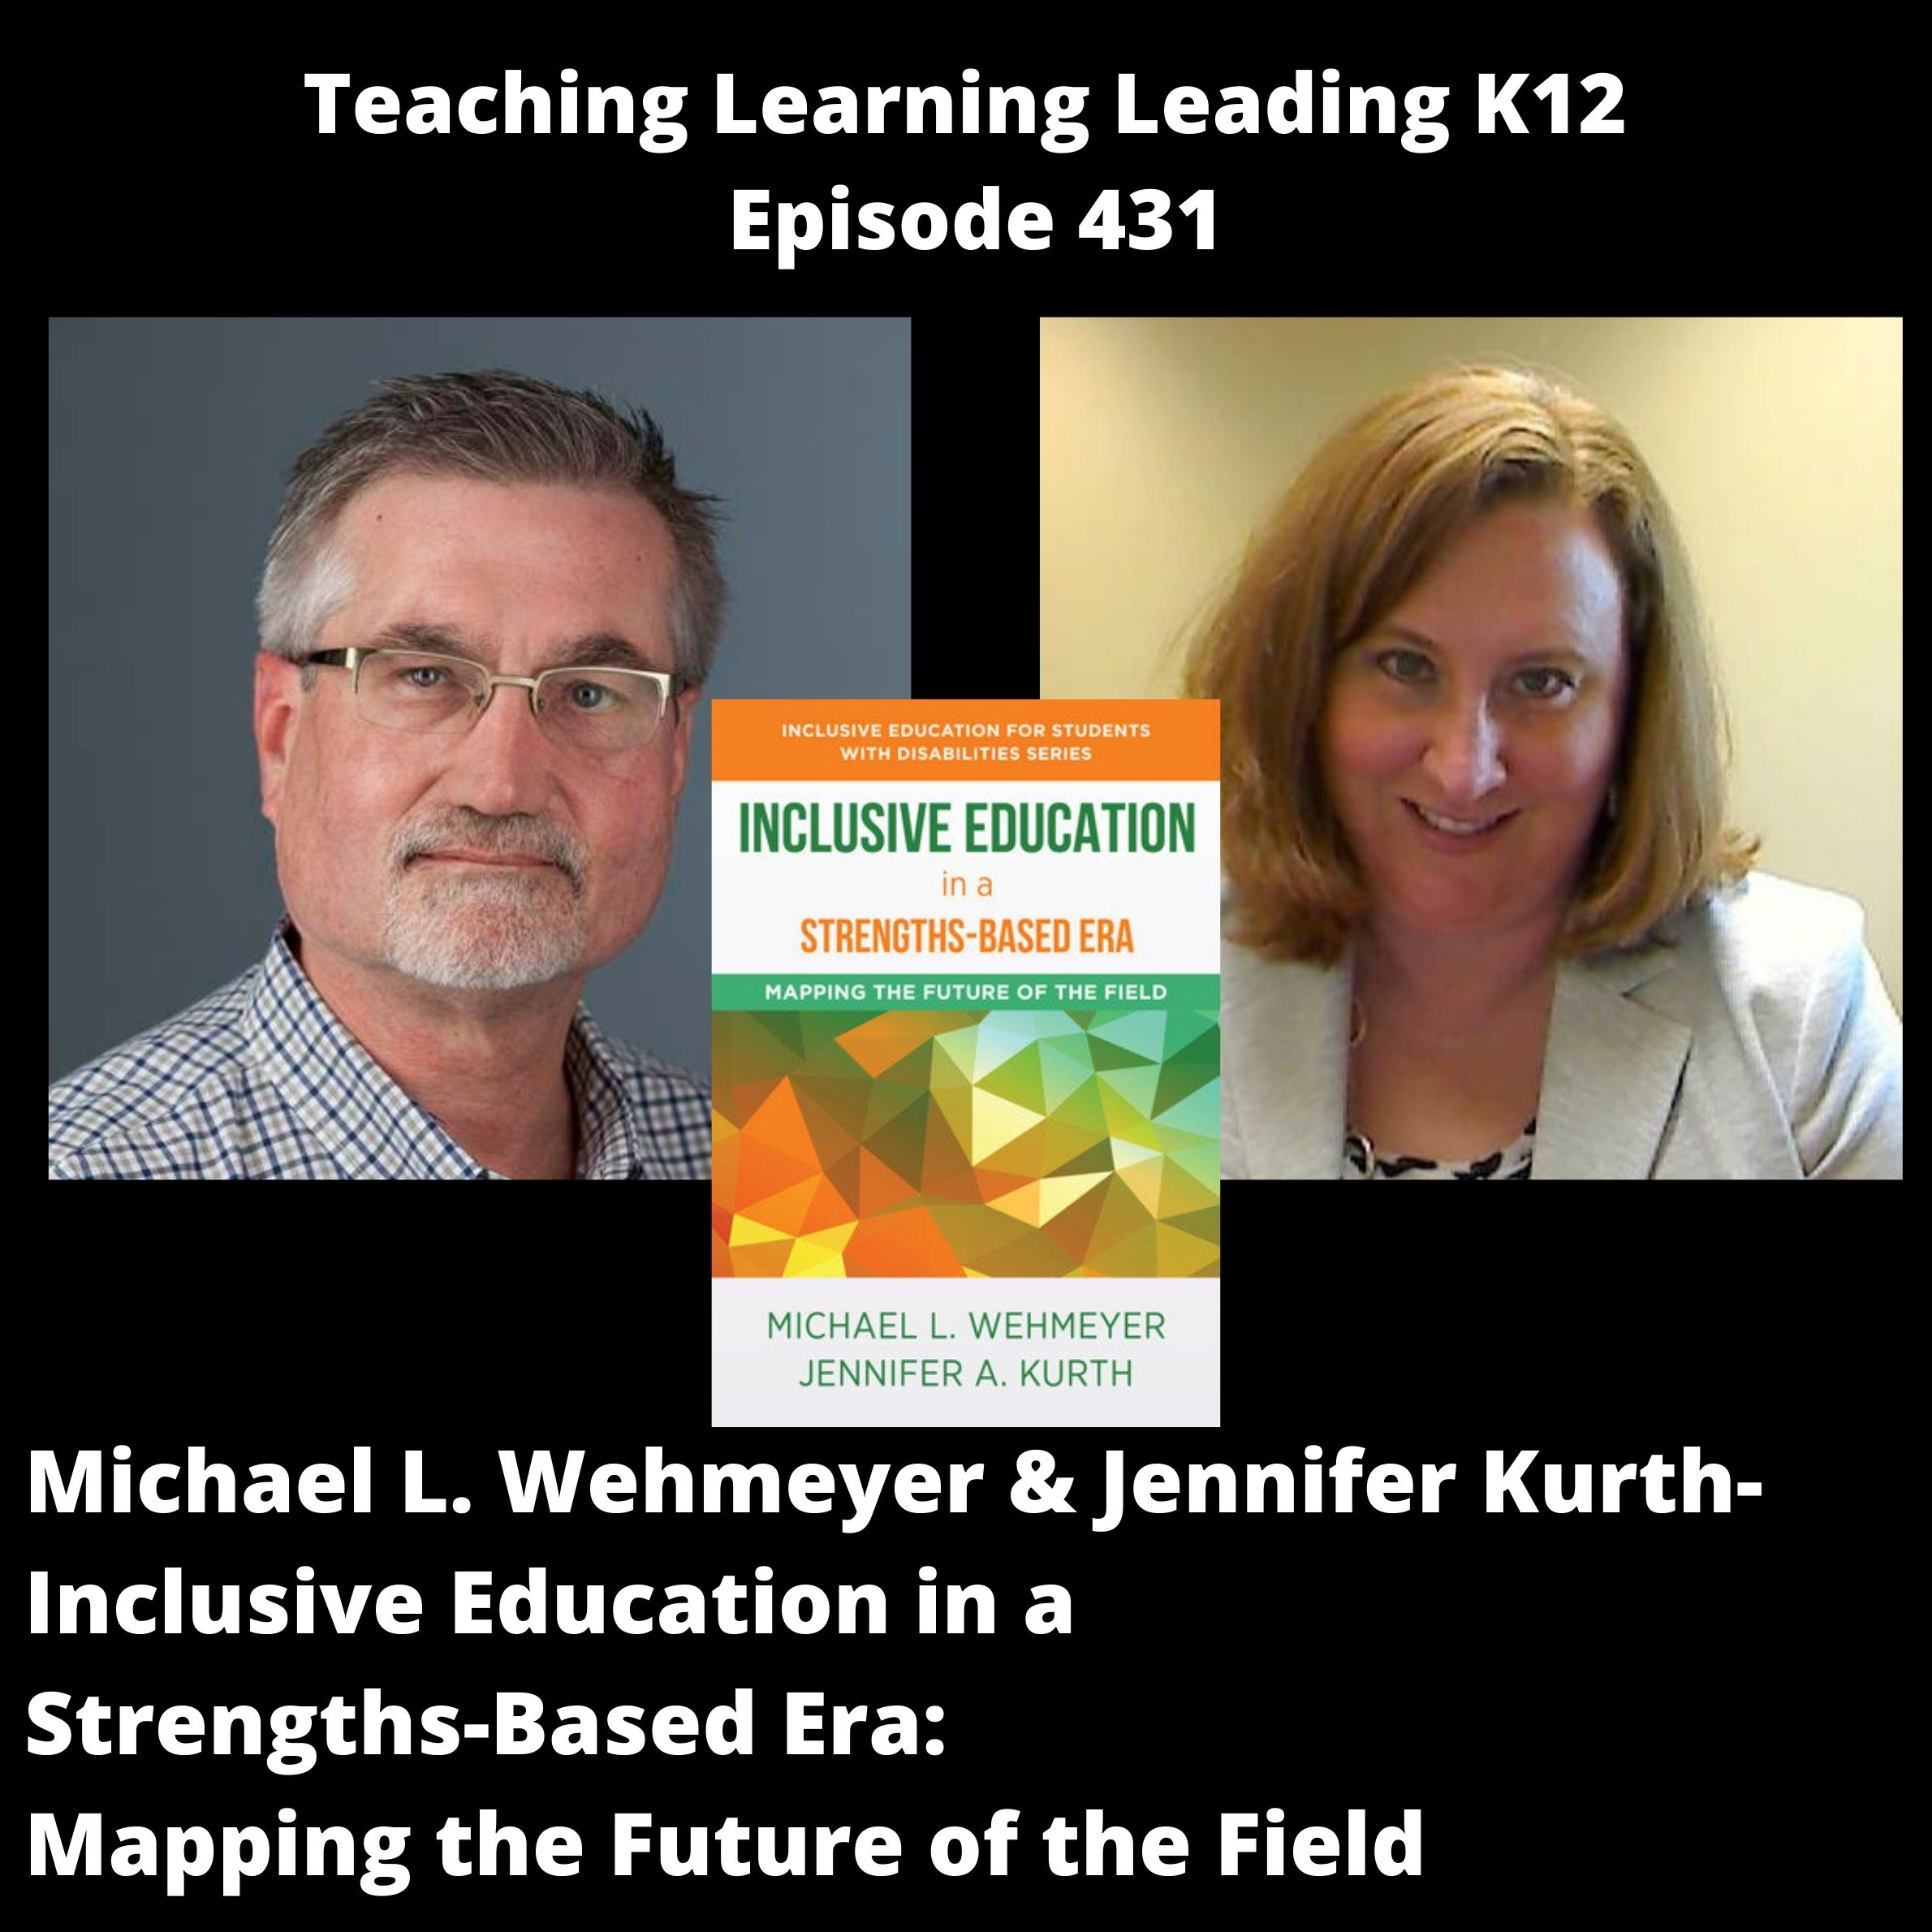 Michael Wehmeyer and Jennifer Kurth - Inclusive Education in a Strengths-Based Era: Mapping the Future of the Field - 431 Image